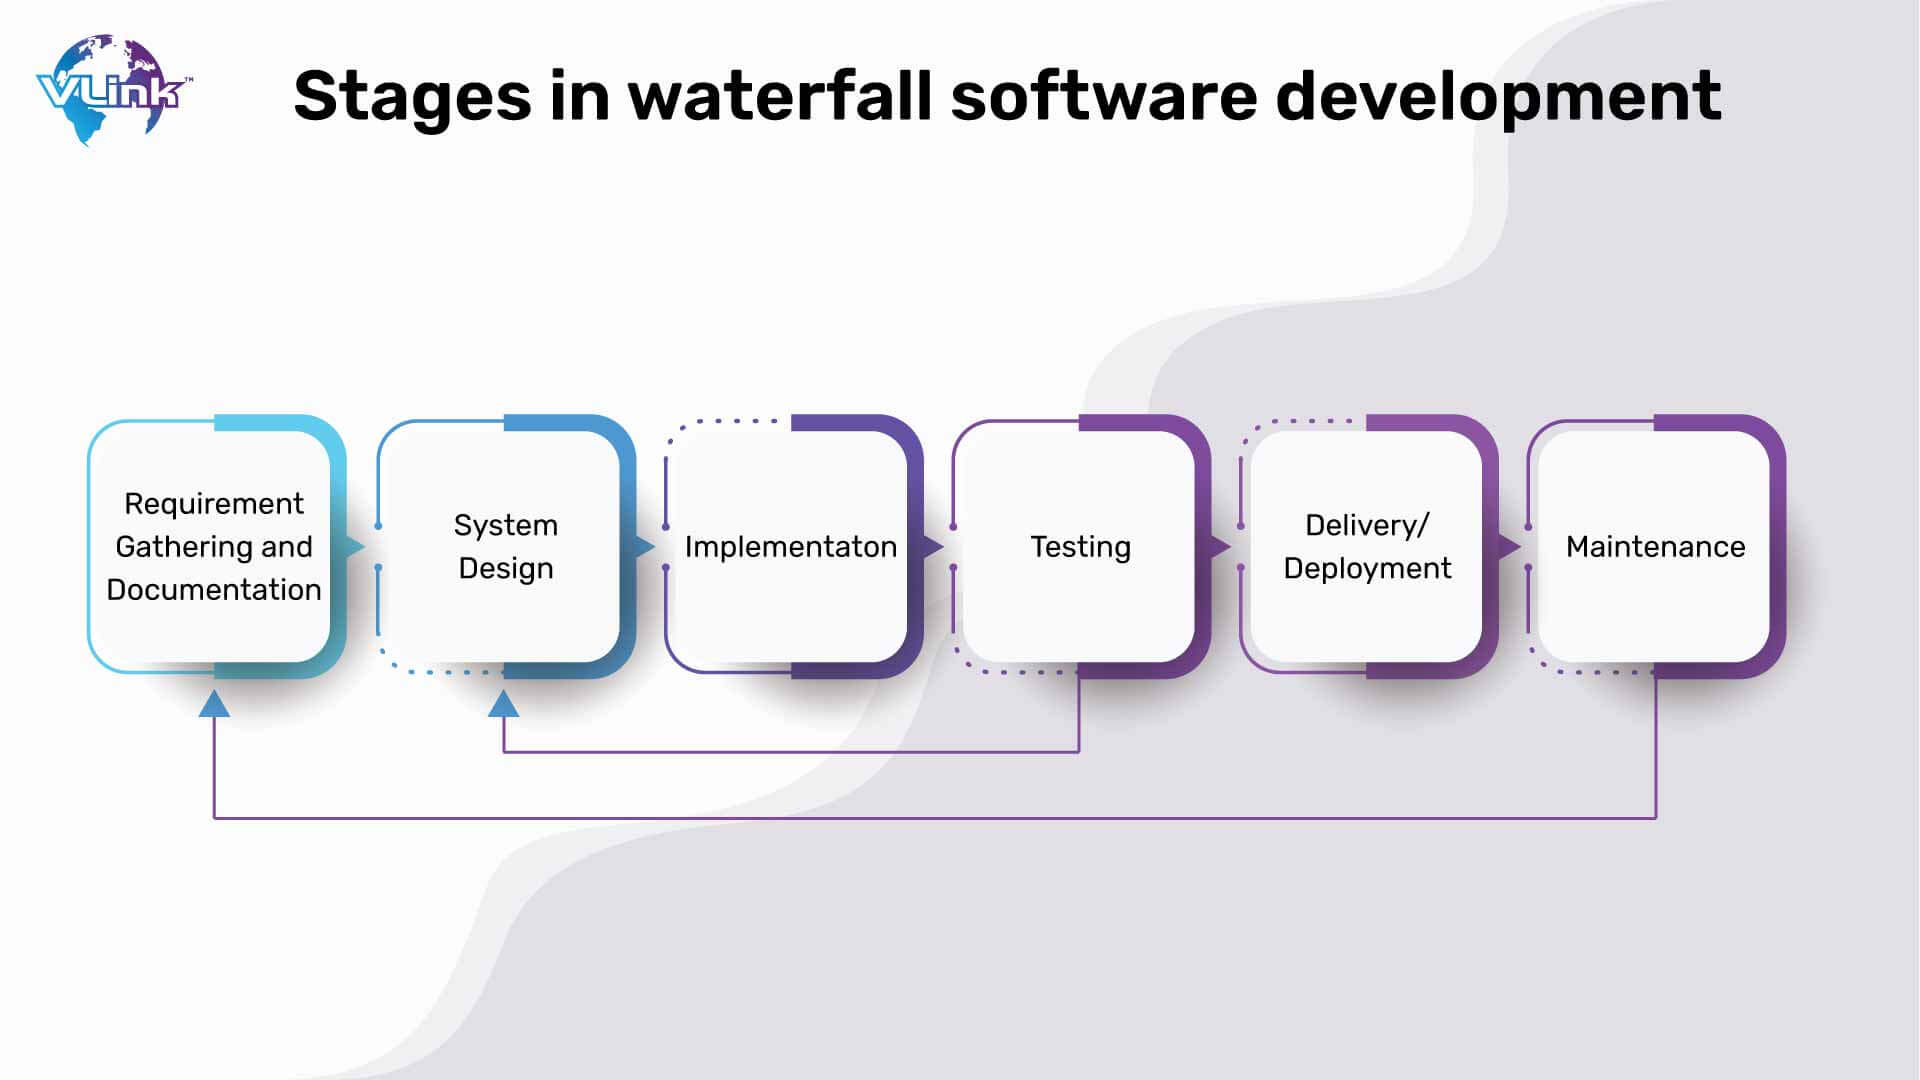 Stages in waterfall software development